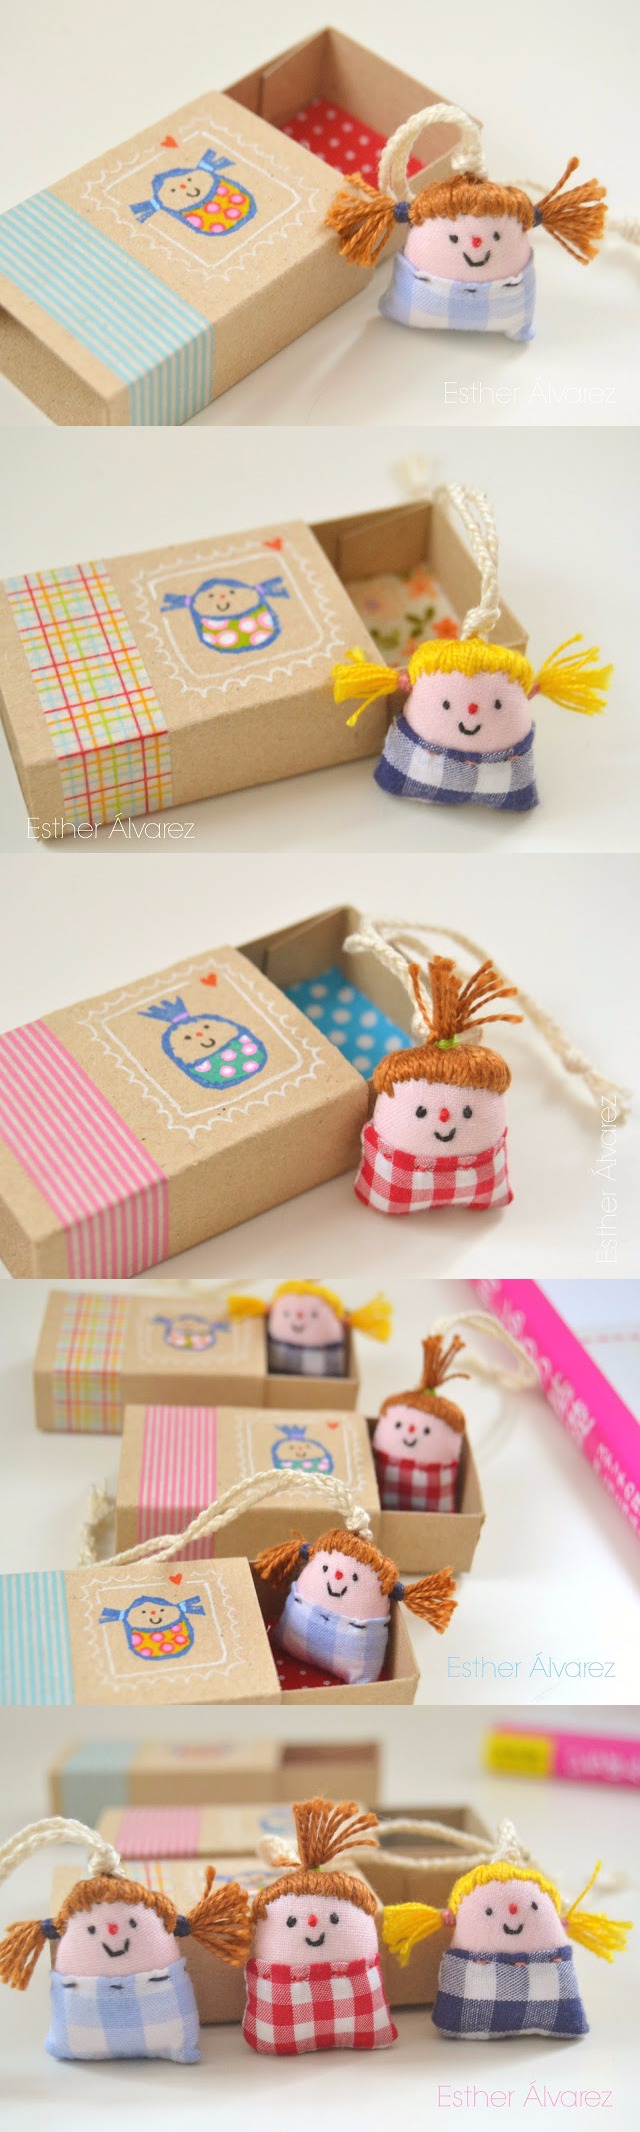 DIY Miniature Dolls With Beds